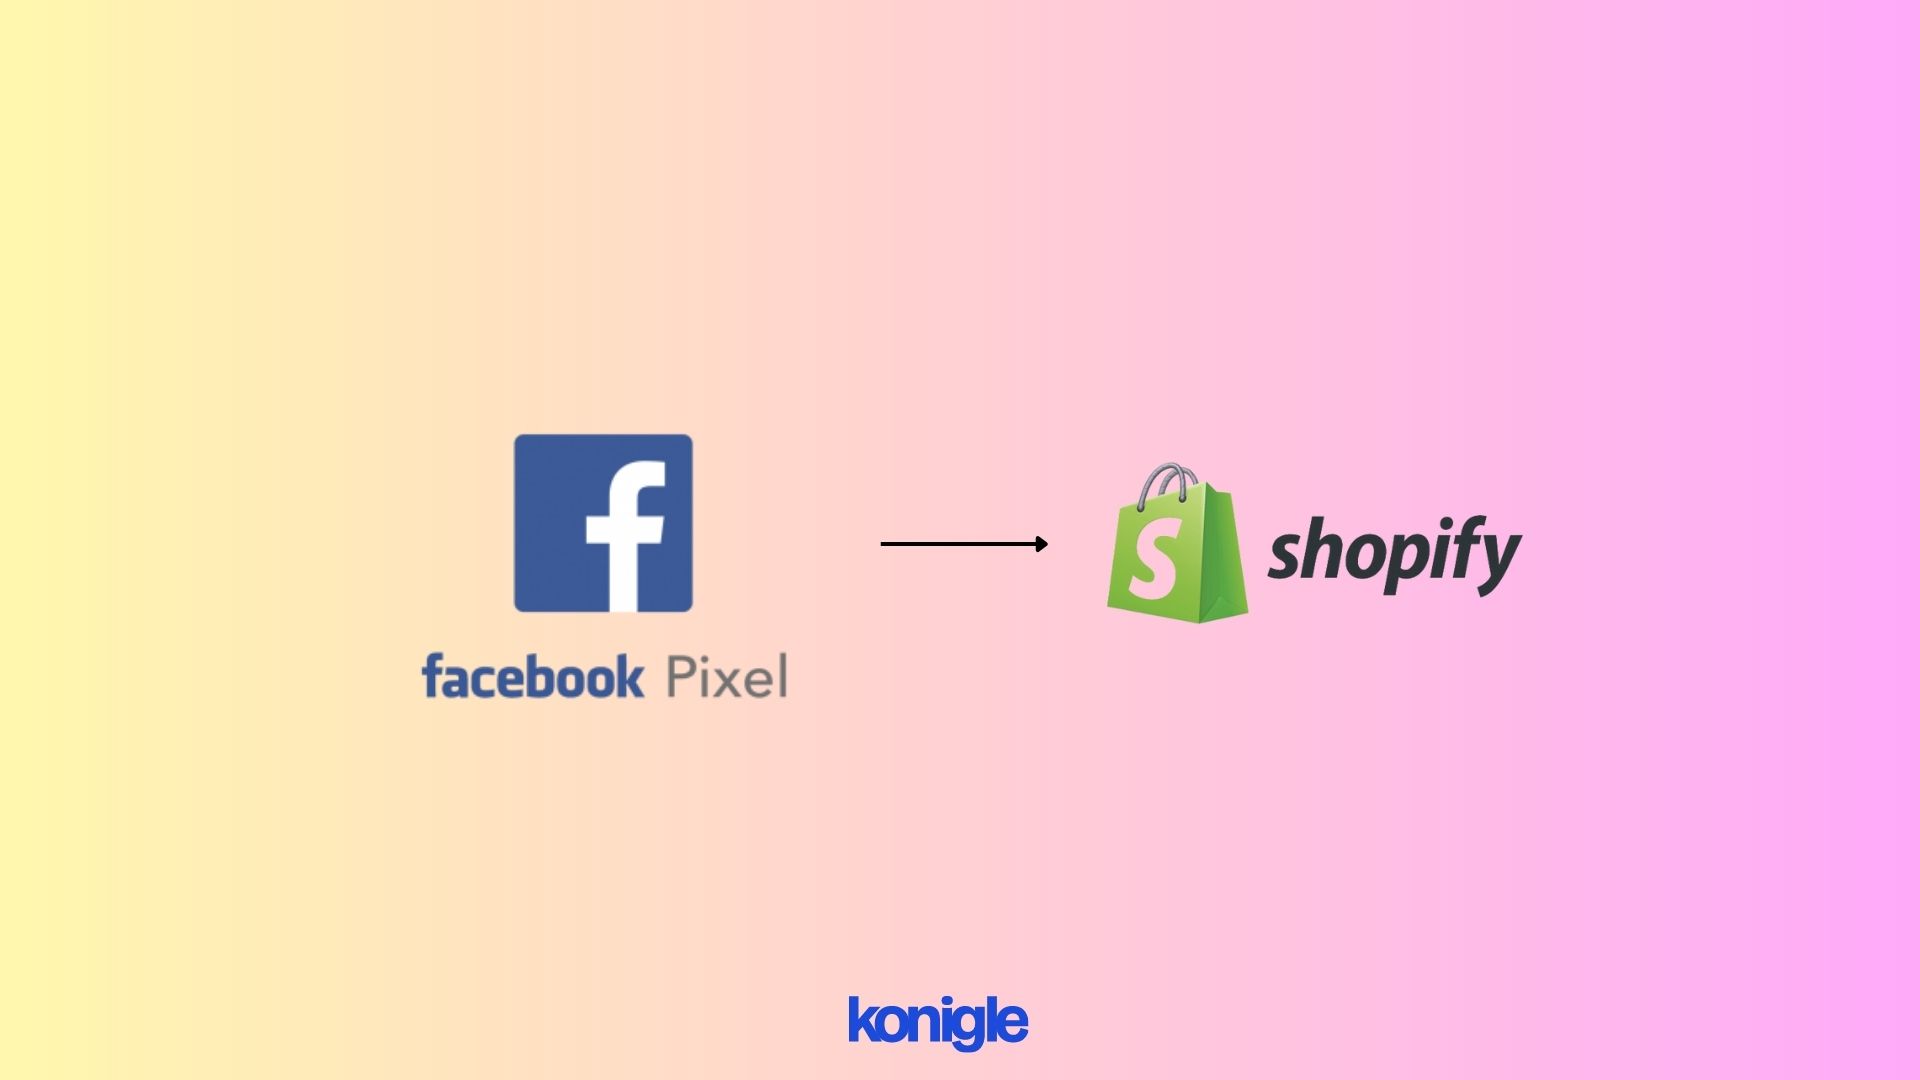 How to install facebook pixel on shopify?